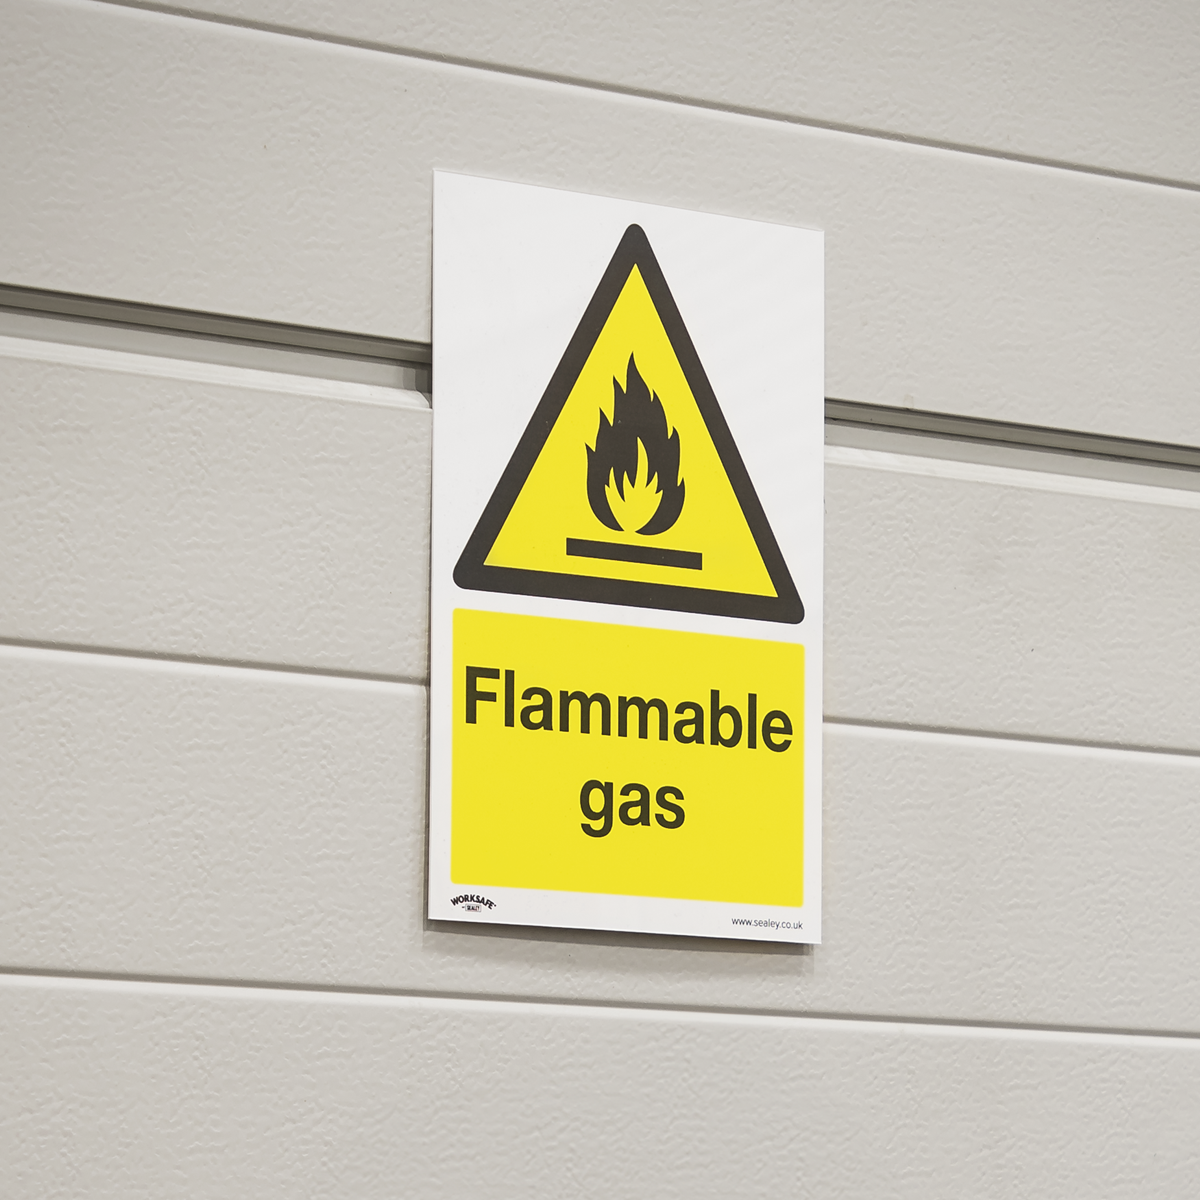 Warning Safety Sign - Flammable Gas - Self-Adhesive Vinyl